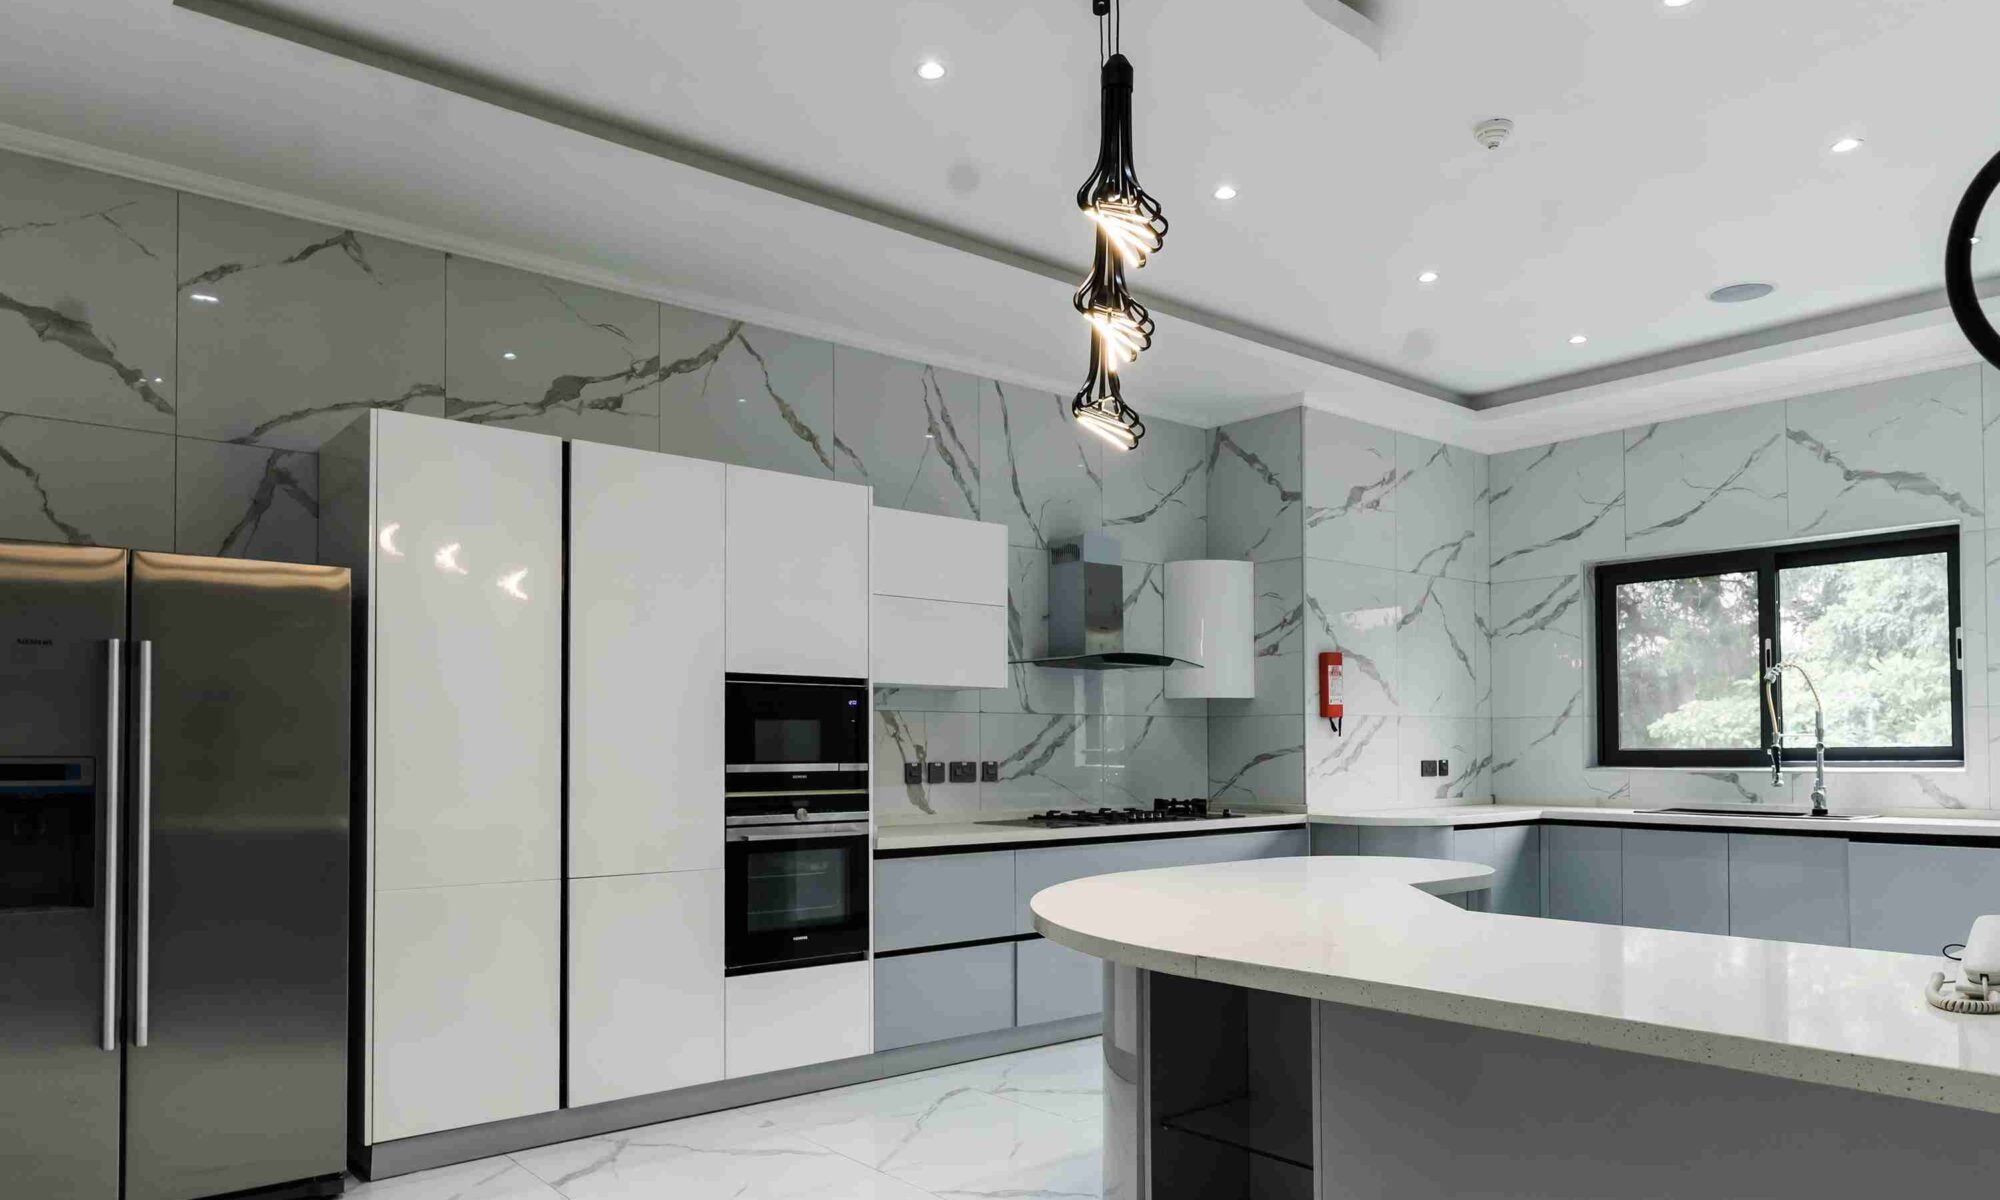 A kitchen with marble walls and floors, and white cabinets.